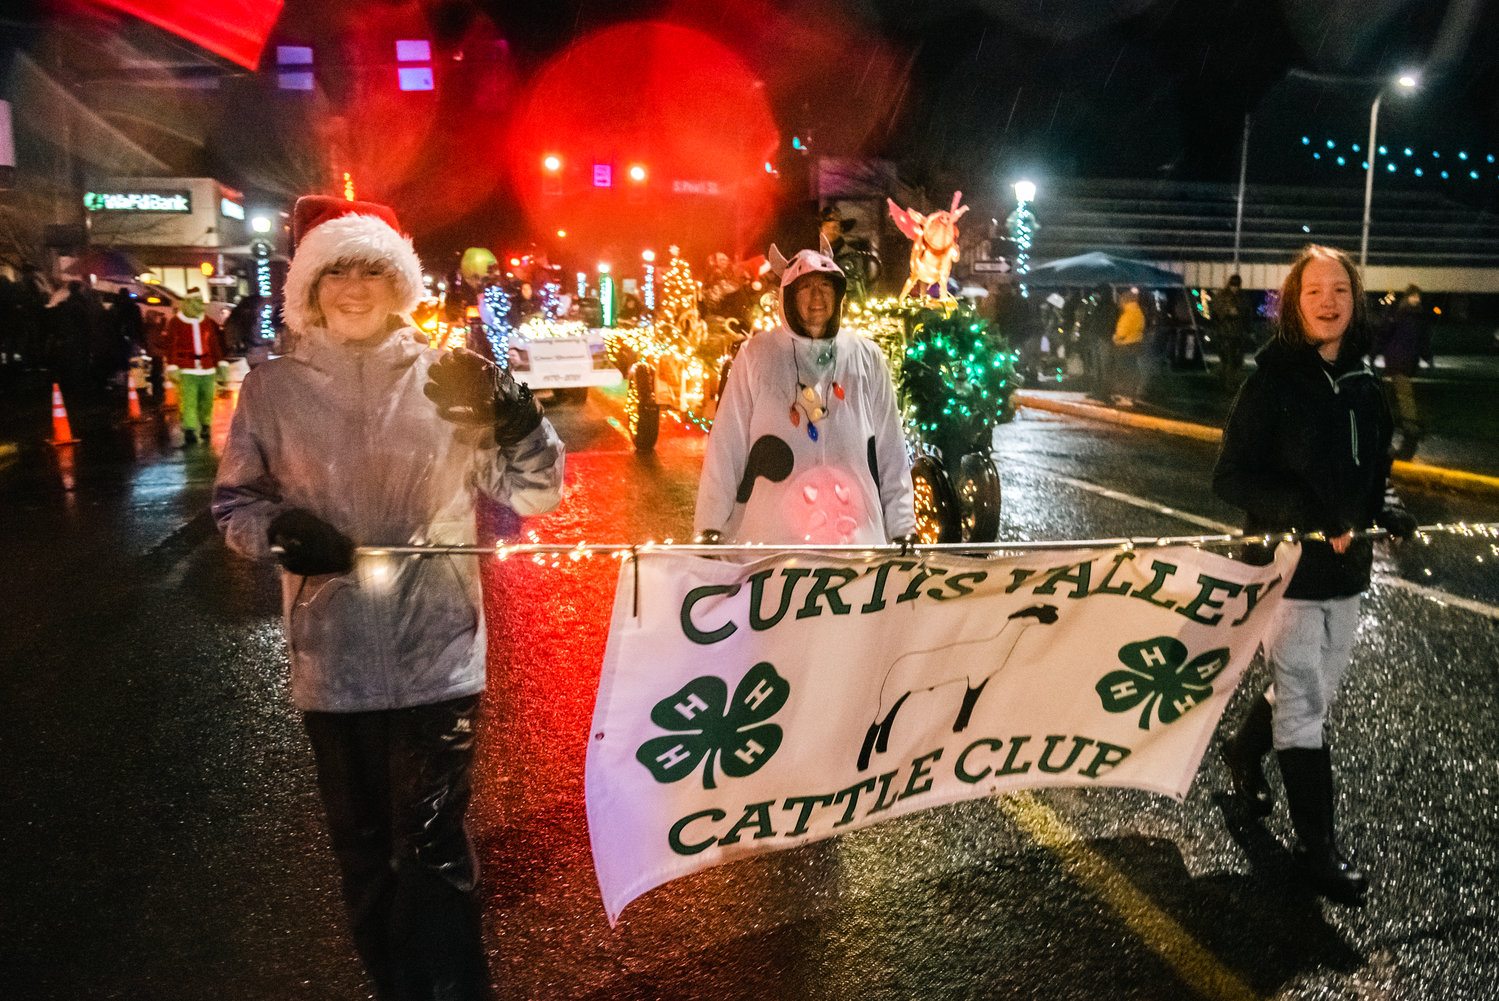 Members of the Curtis Valley Cattle Club smile and wave during the Lighted Tractor Parade in Centralia Saturday night.